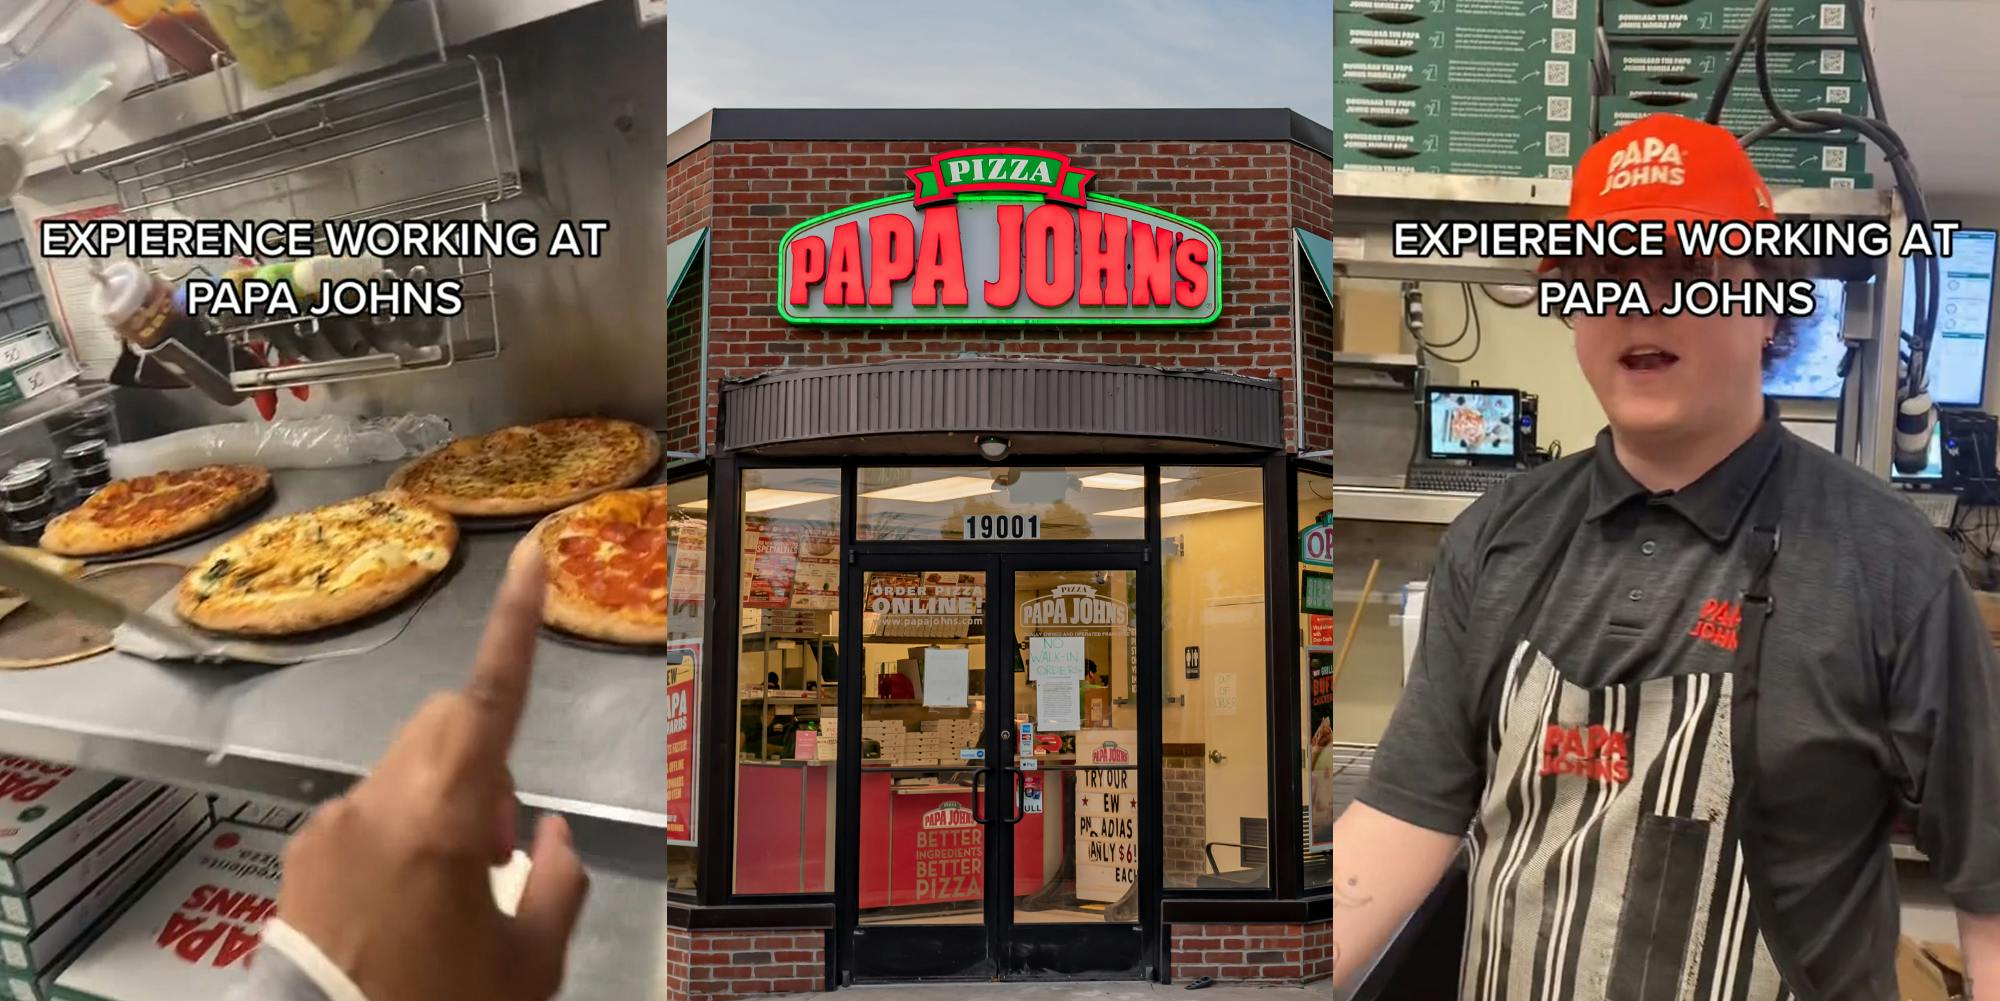 Papa John's worker pointing at pizzas with caption "EXPERIENCE WORKING AT PAPA JOHNS" (l) Papa John's building with sign (c) Papa John's manager speaking with caption "EXPERIENCE WORKING AT PAPA JOHNS" (r)